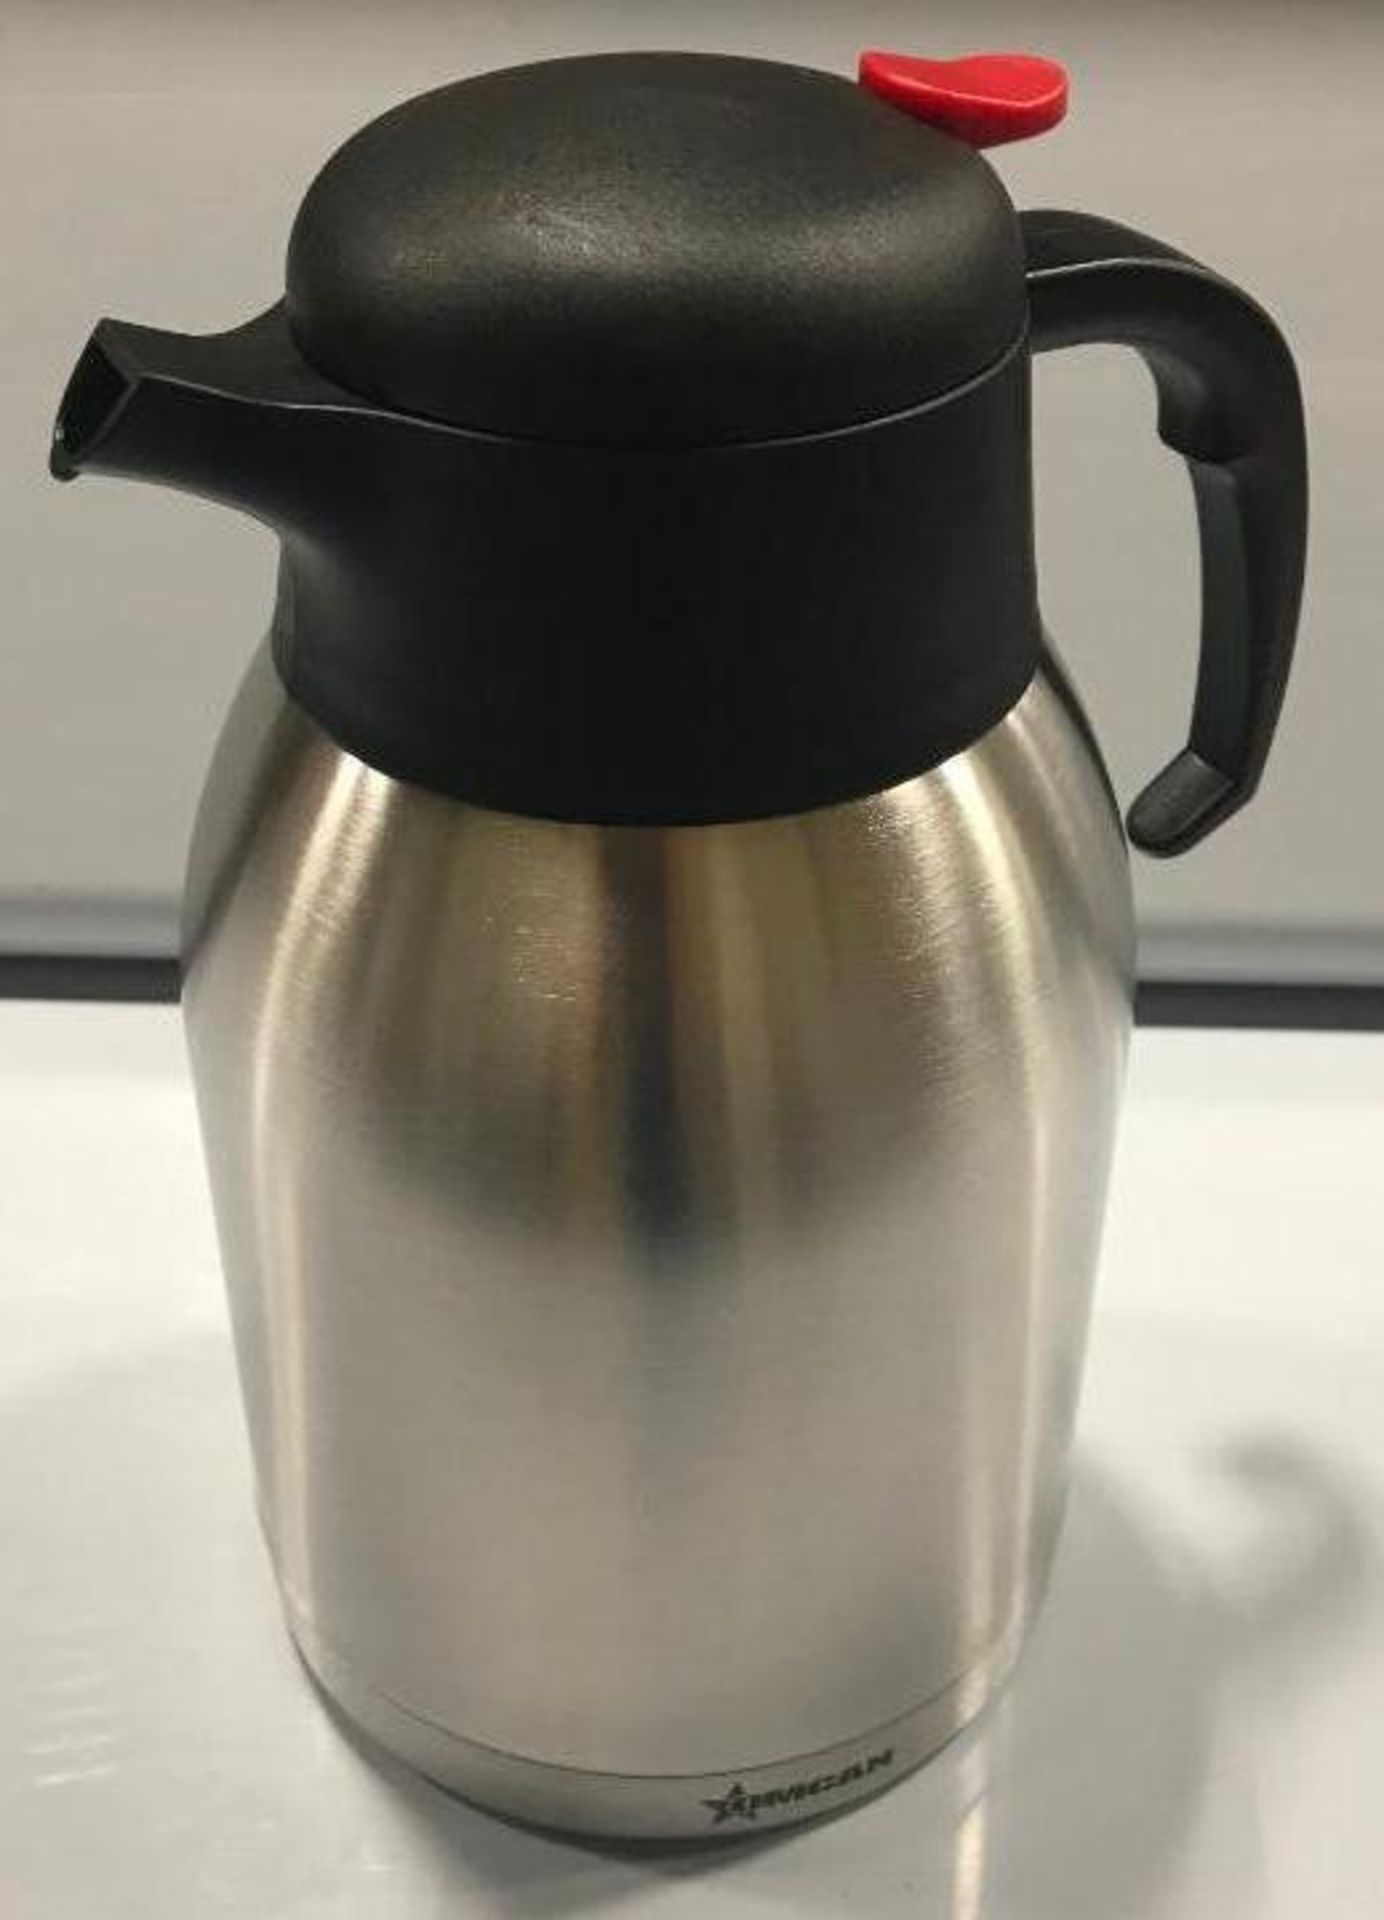 OMCAN THERMAL COFFEE CARAFE 8 CUP FOR COFFEE MACHINES AND MORE - NEW - Image 3 of 3